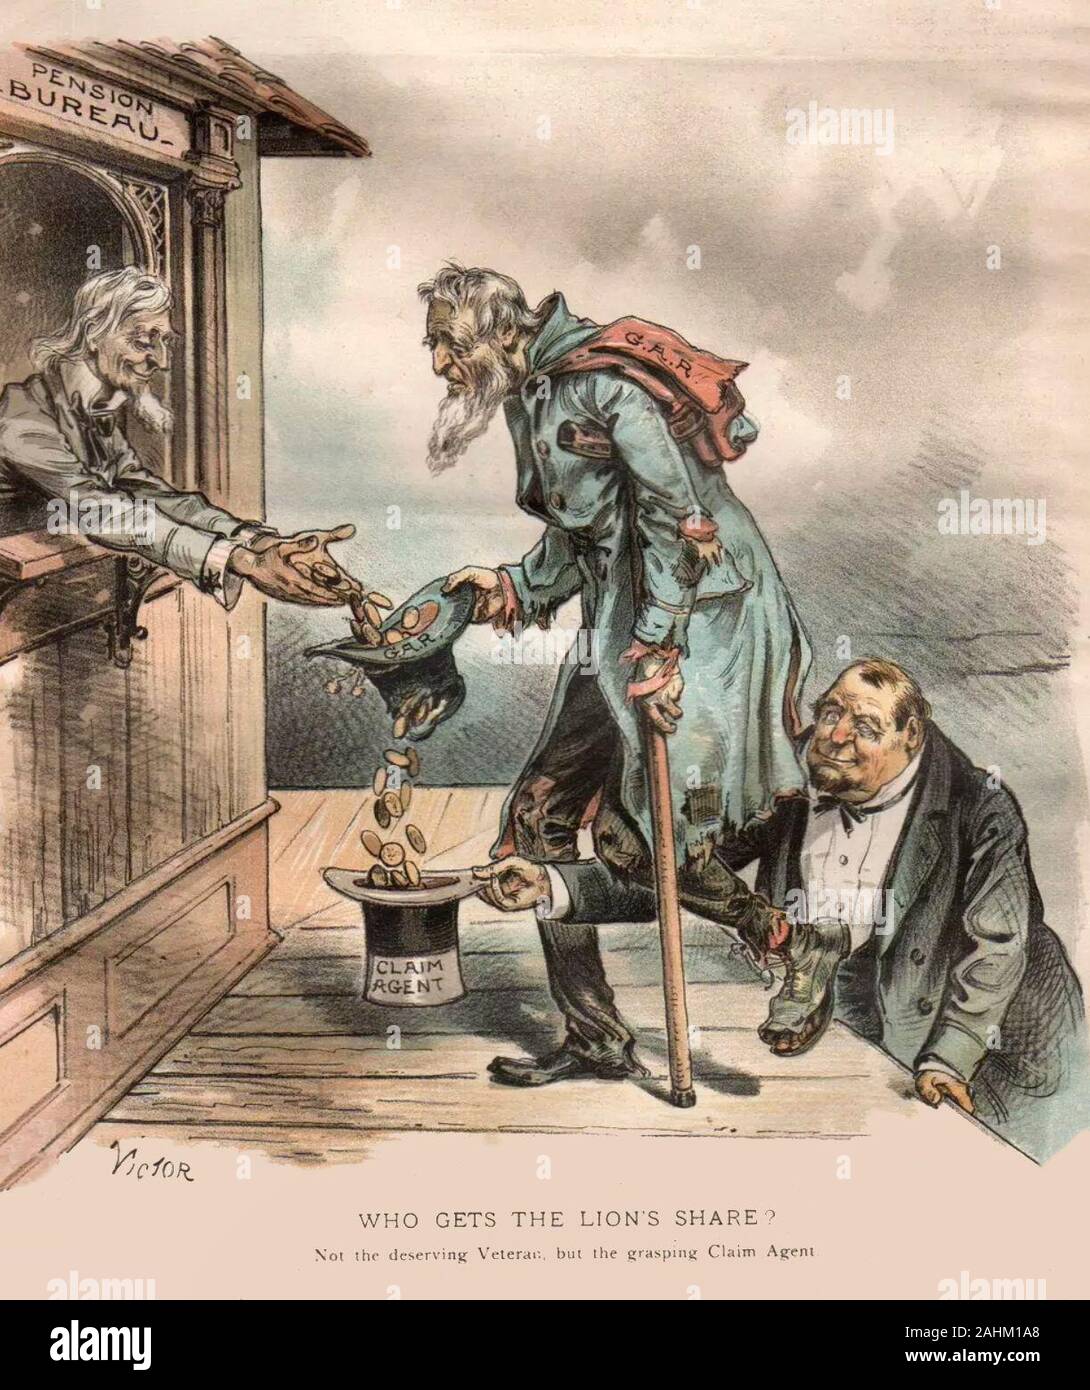 Who gets the Lion's Share? Not the deserving veteran, but the grasping claim agent - Political Cartoon regarding the Pensions Bureau, September 1889 Stock Photo